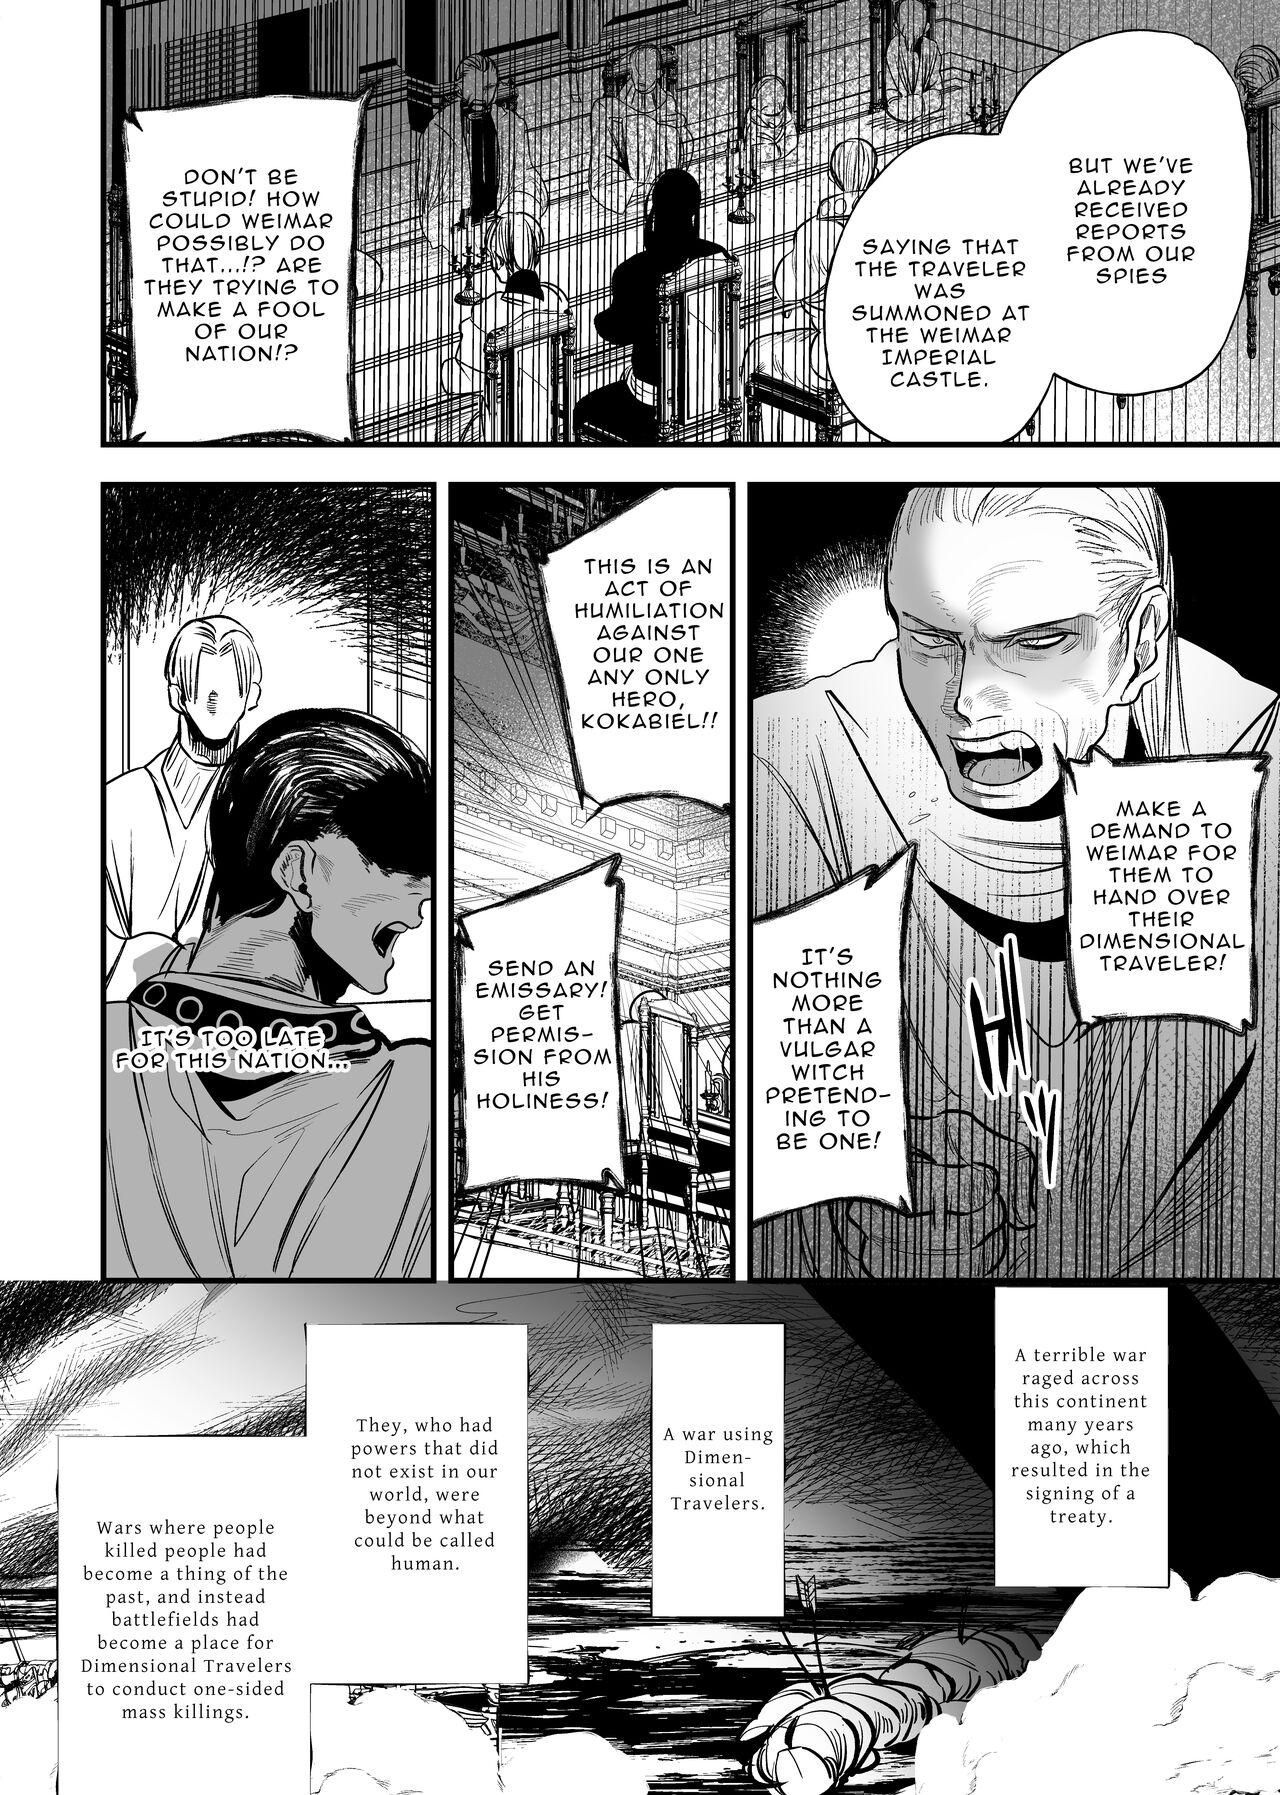 Hotel The Man Who Saved Me on my Isekai Trip was a Killer... 2 - Original Clothed Sex - Page 6